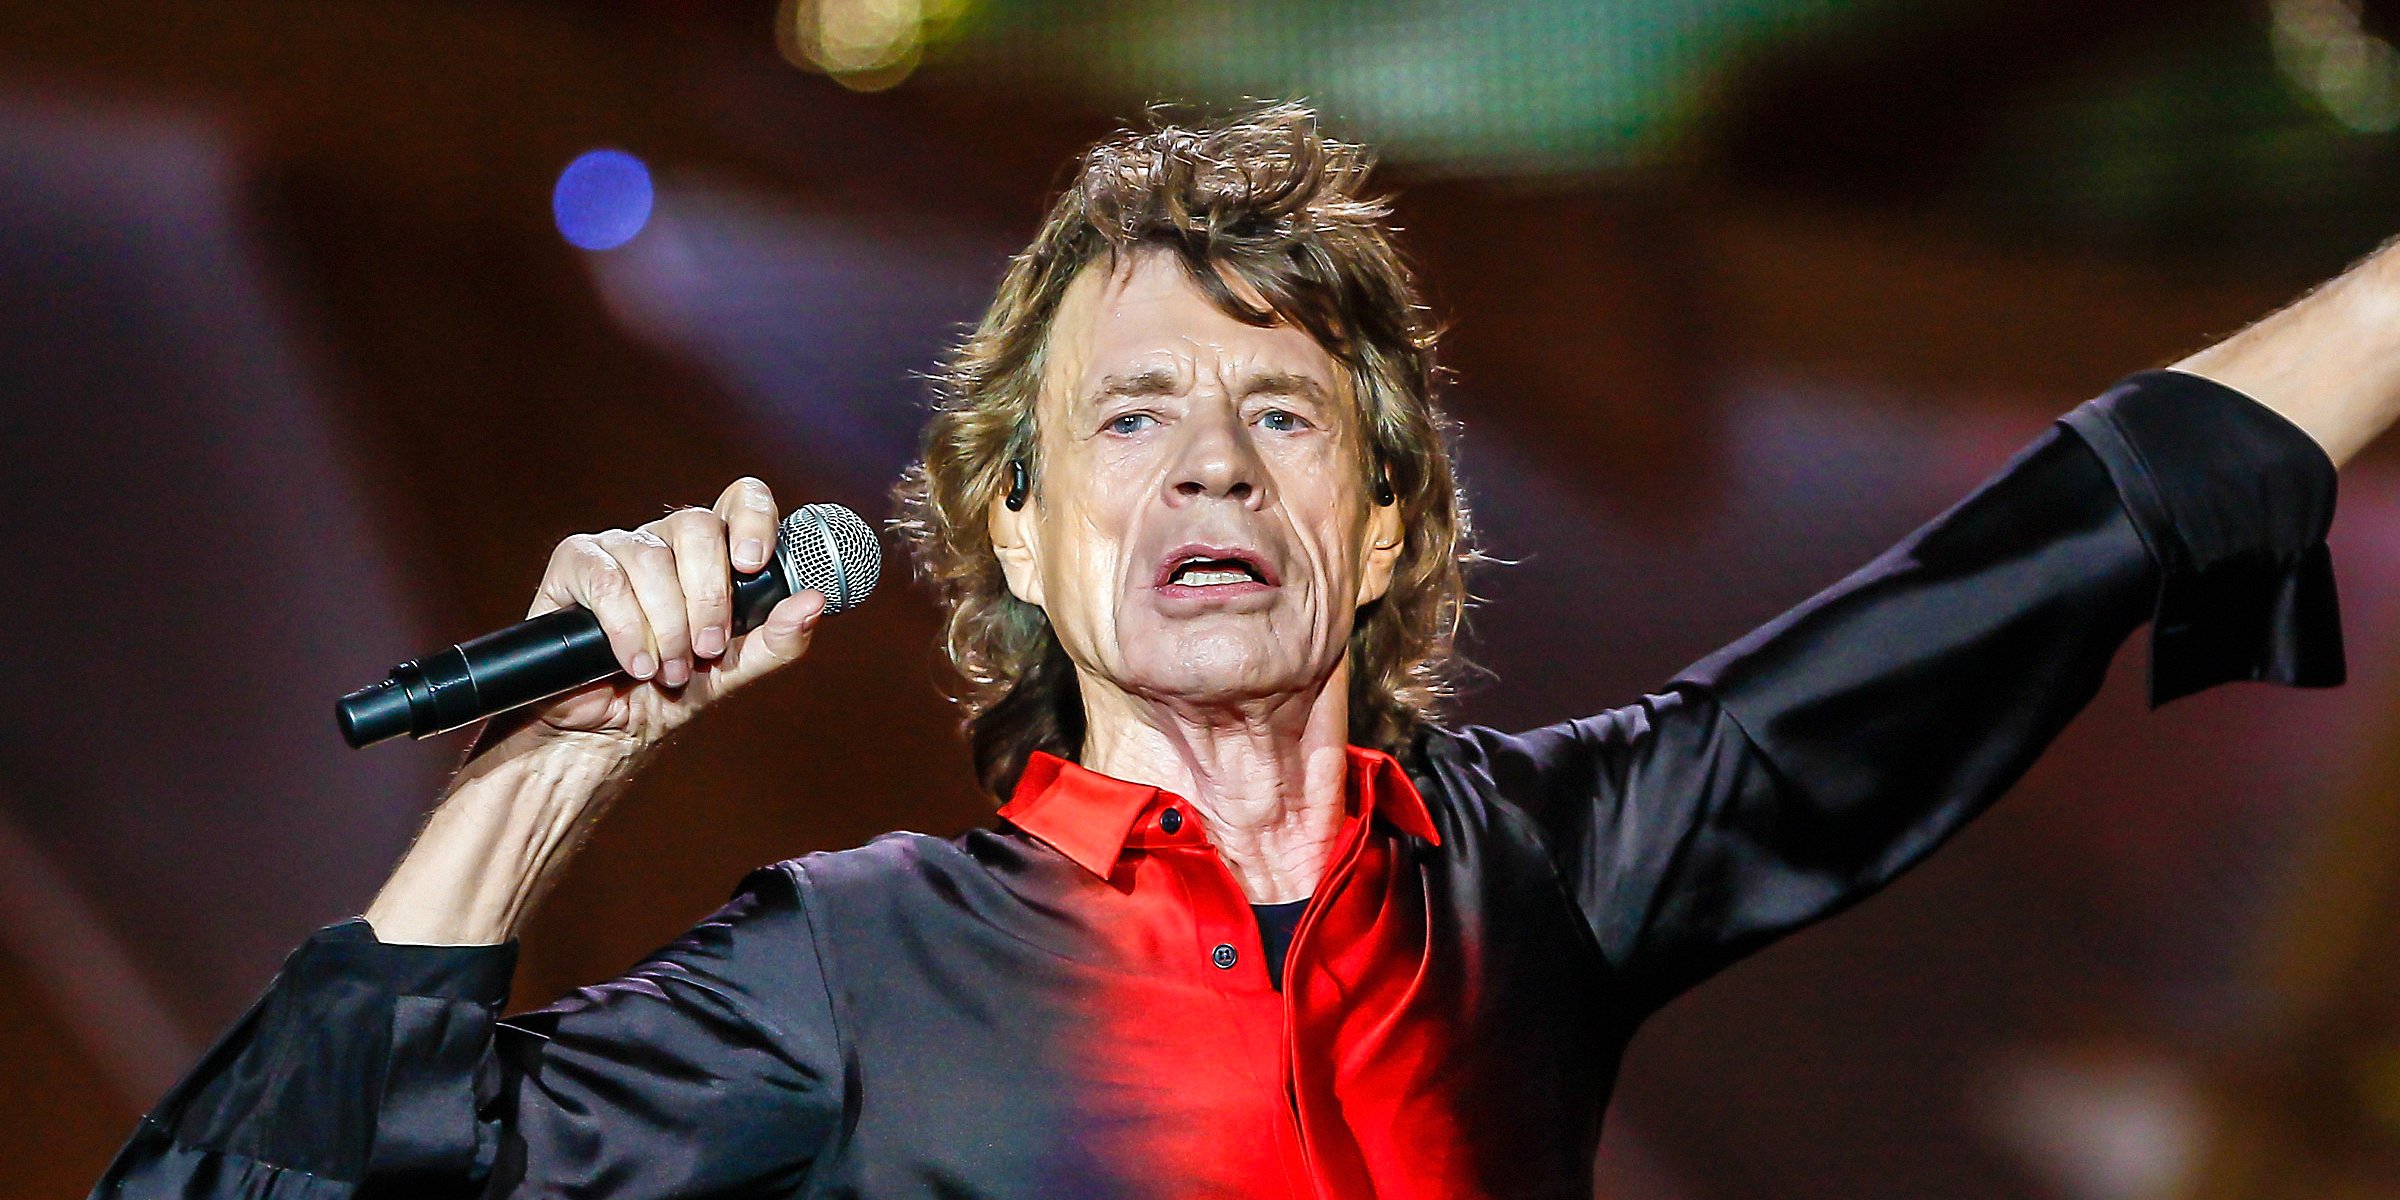 Mick Jagger. ┃ Foto: Getty Images